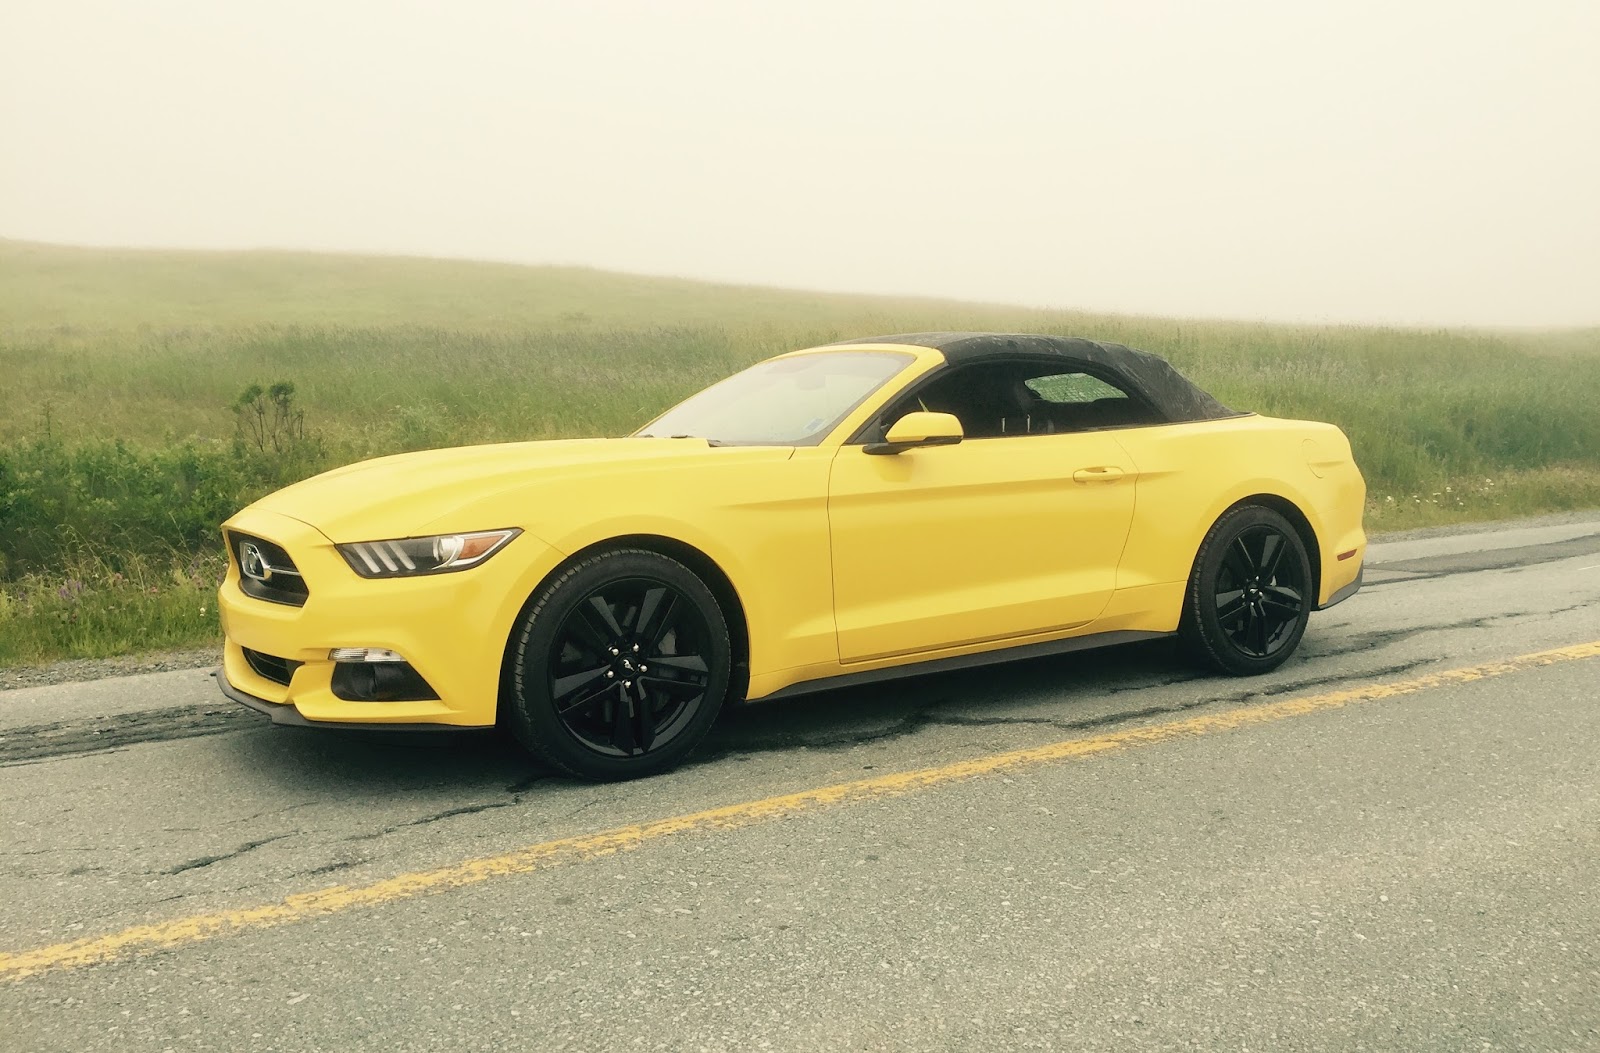 2015 Ford Mustang EcoBoost Convertible Review – Great Car With This